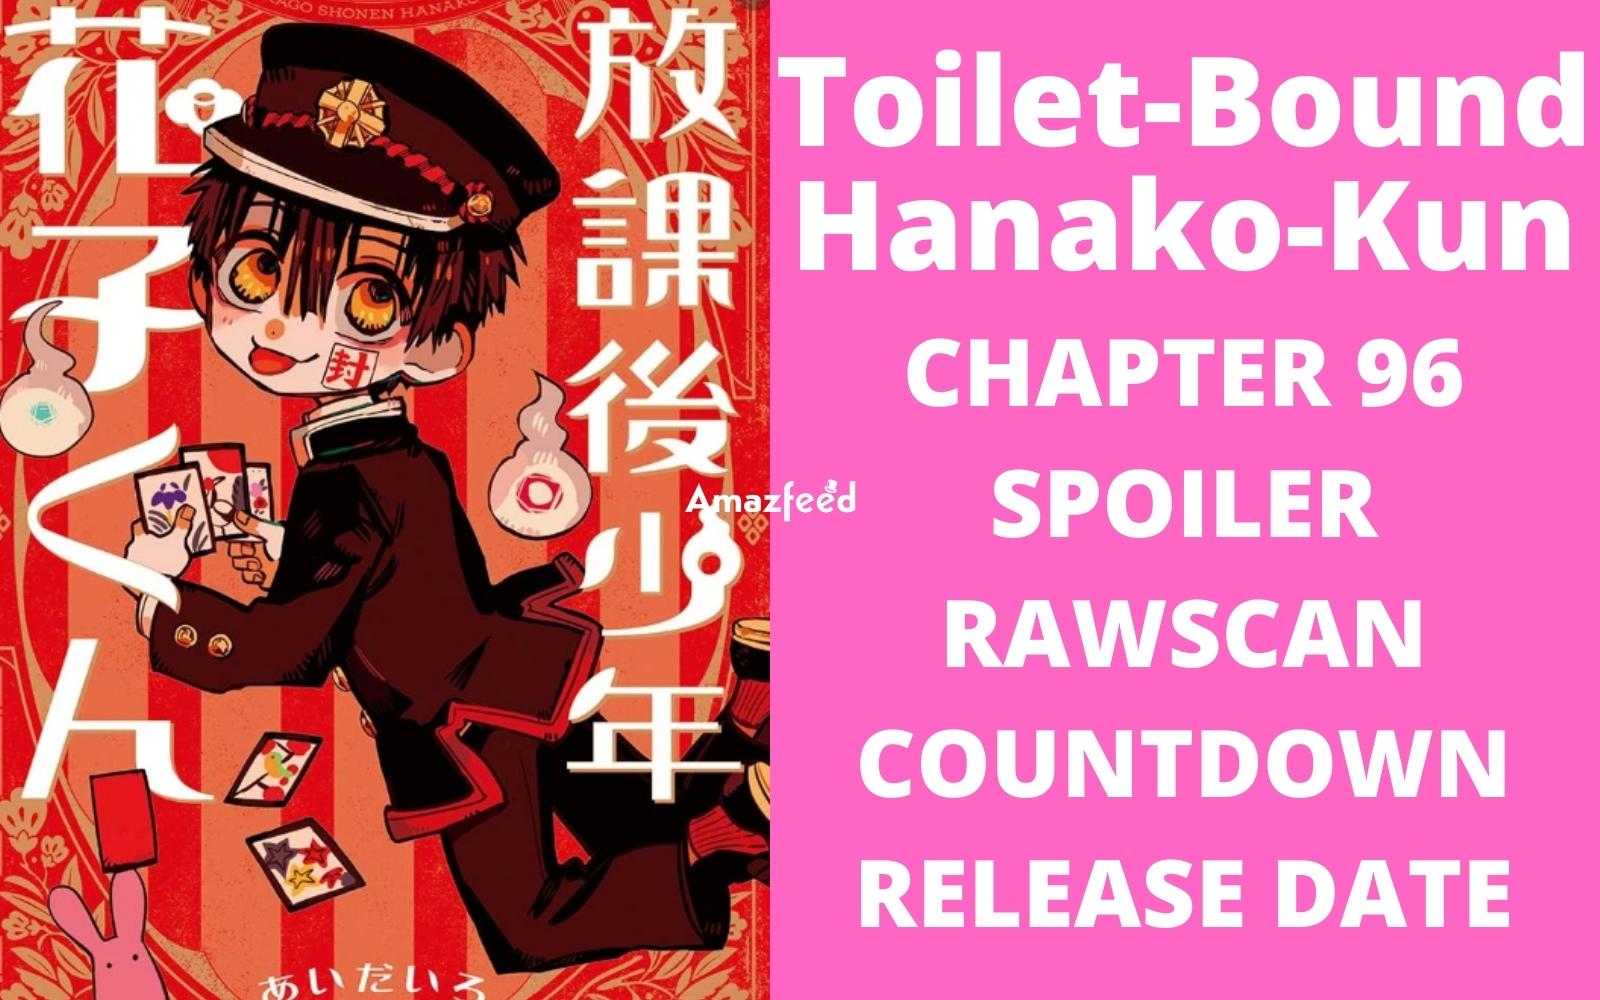 Toilet-Bound Hanako-Kun Chapter 96 Spoiler, Release Date, Raw Scan, Countdown, Color Page